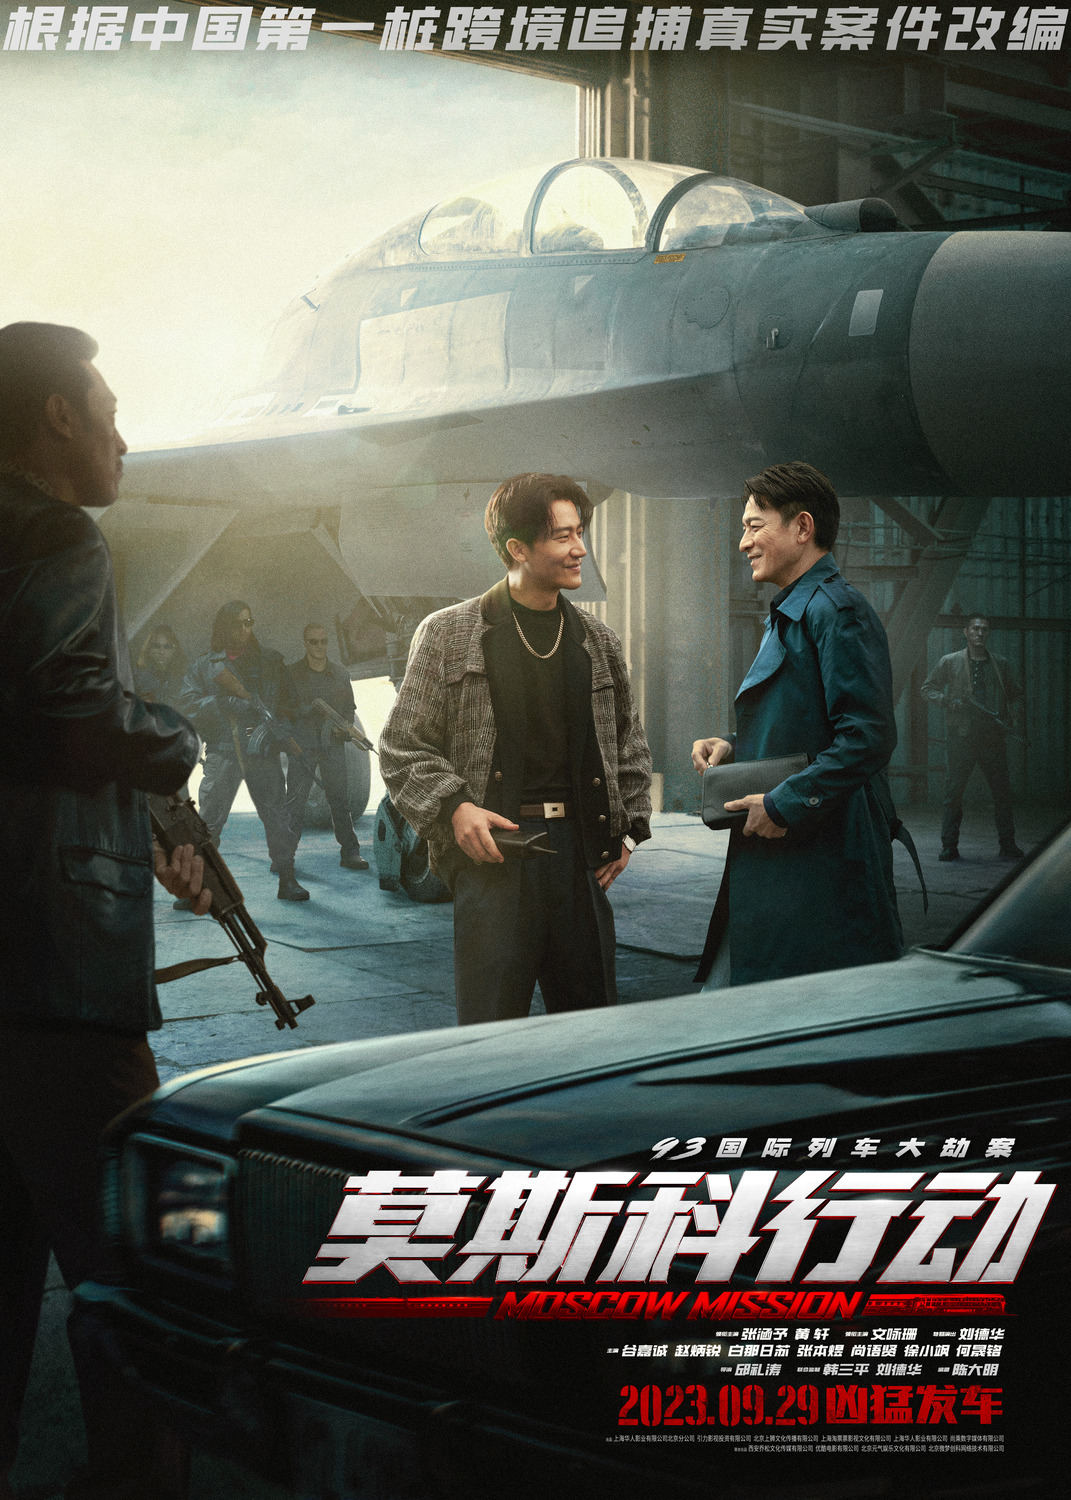 Extra Large Movie Poster Image for Mosike xingdong (#7 of 8)